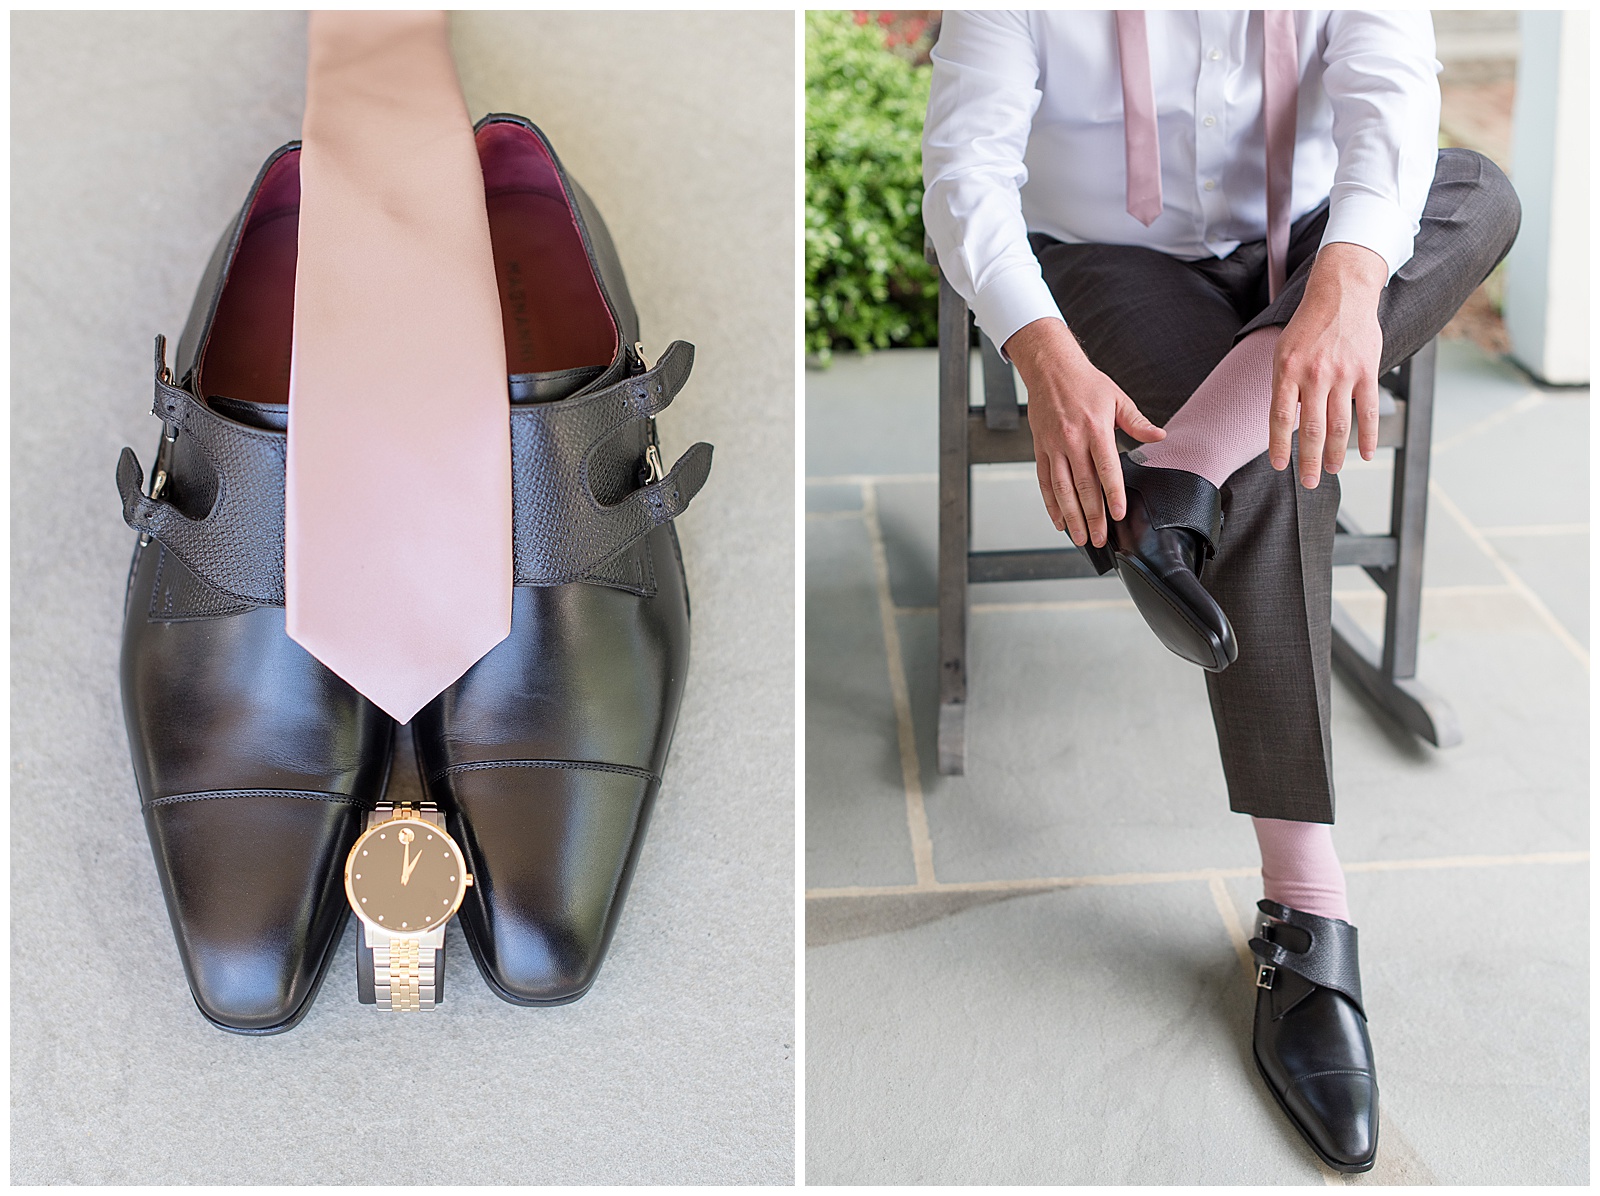 groom's accessories on display as groom puts on his shoe while sitting on rocking chair at barn wedding venue